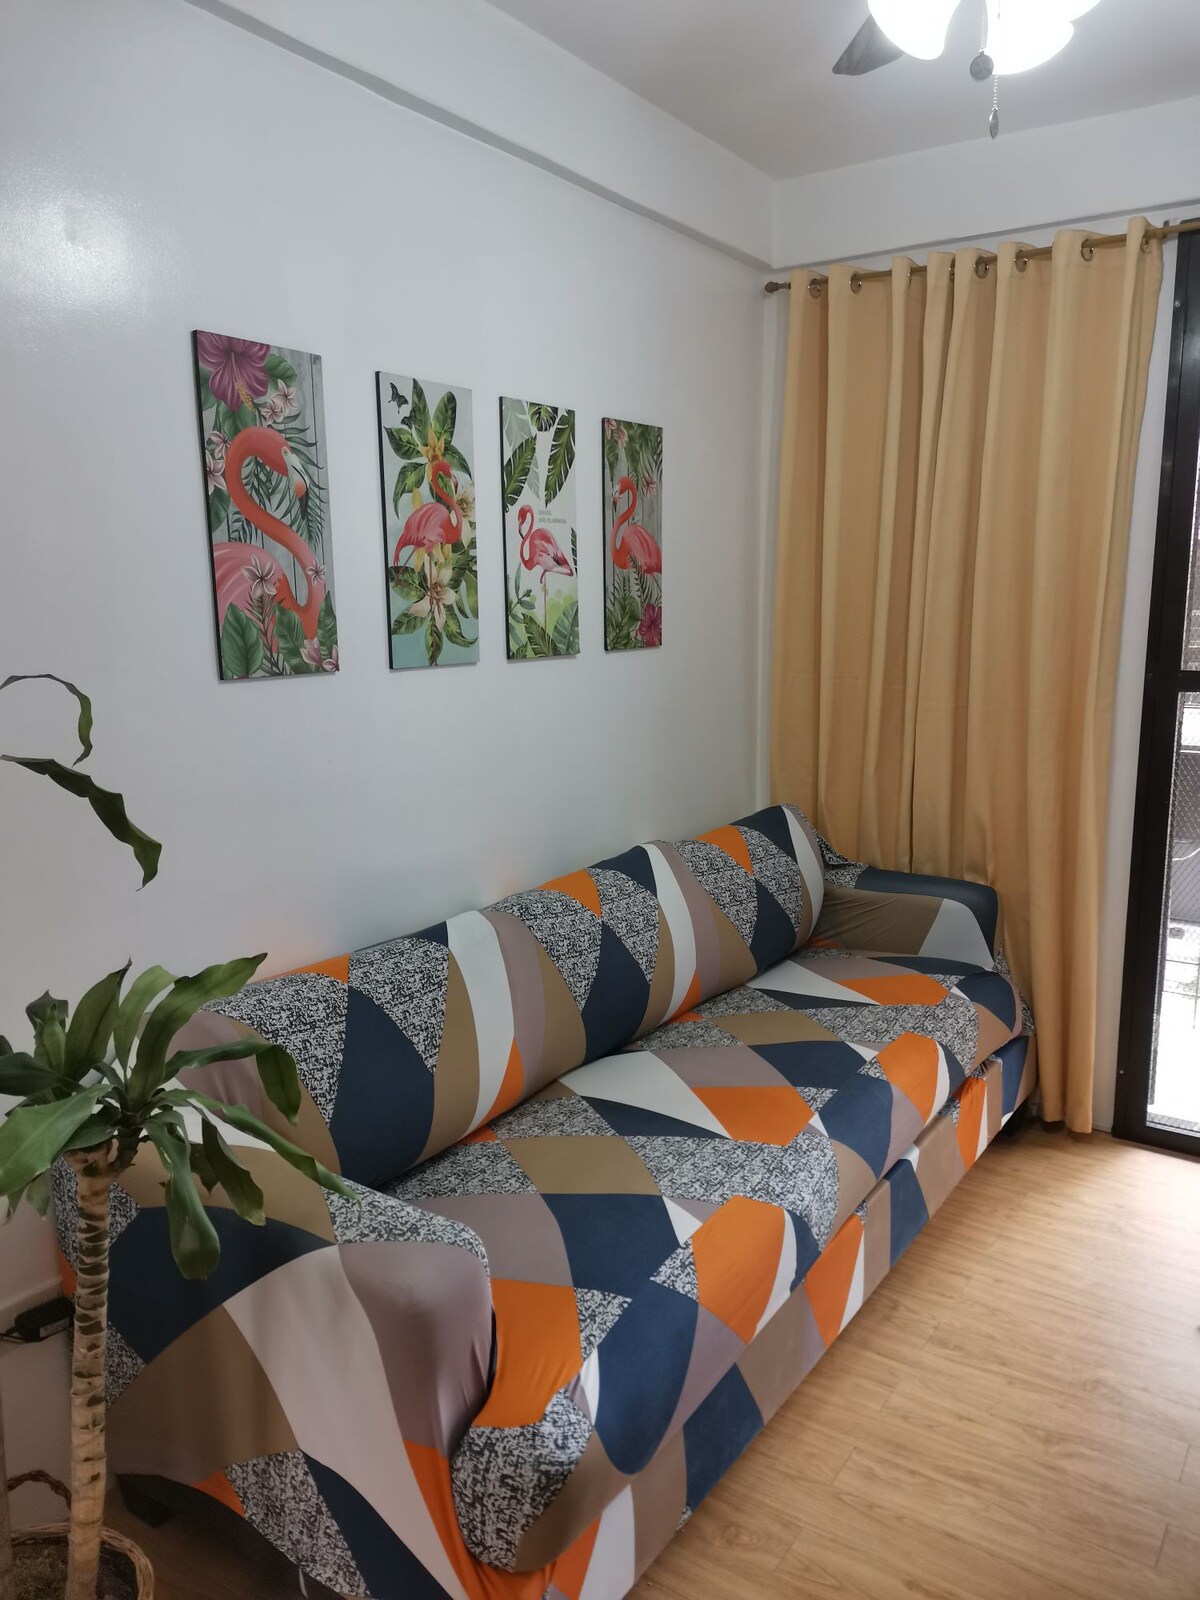 Condo Unit for Rent in Pasig @ Arezzo Place Pasig